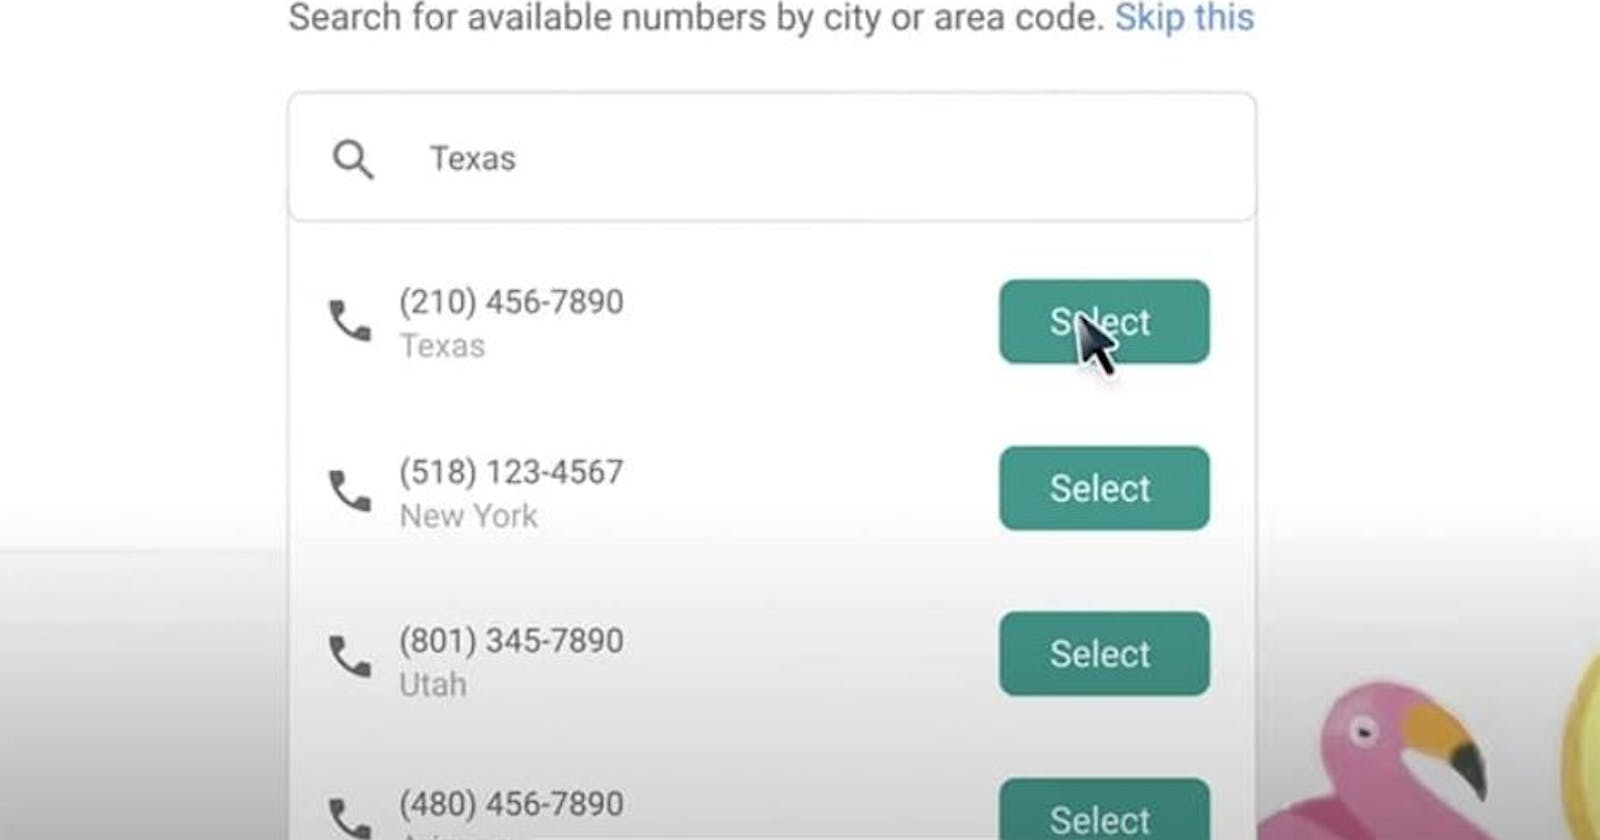 How To Get Unlimited Google Voice Numbers in USA And Any Country